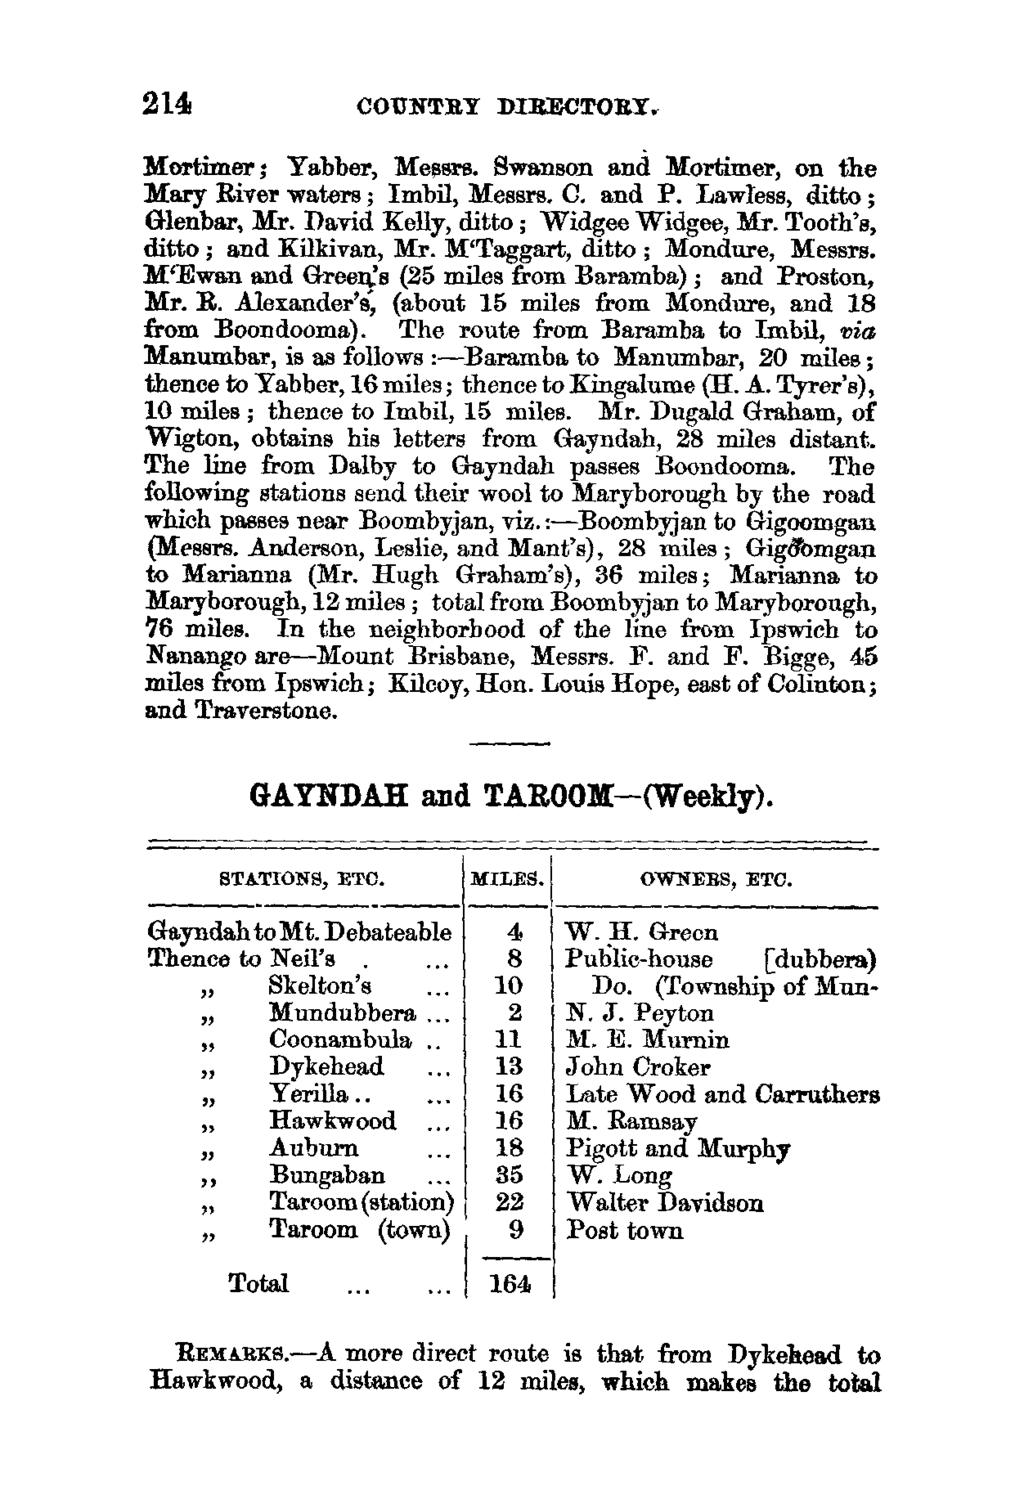 214 COUNTRY DIRECTORY. Mortimer ; Yabber, Messrs. Swanson and Mortimer, on the Mary River waters ; Imbil, Messrs. C. and P. Lawless, ditto ; Glenbar, Mr. David Ke lly, ditto ; Widgee Widgee, Mr.